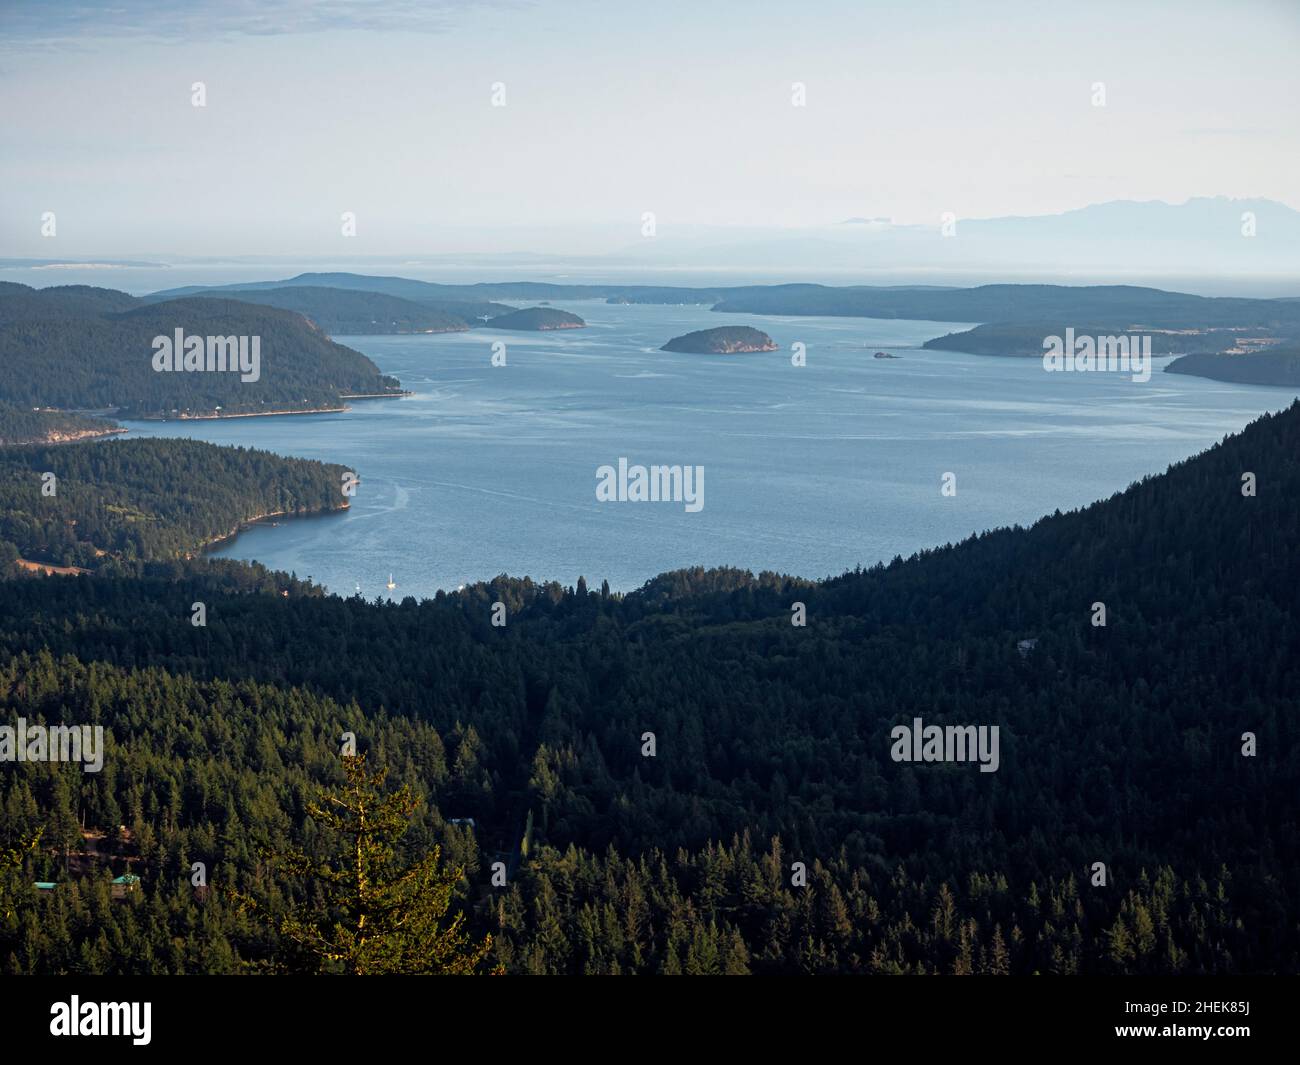 WA21050-00...WASHINGTON - East Sound and Orcas Island viewed from the Mount Constitution Road. Stock Photo